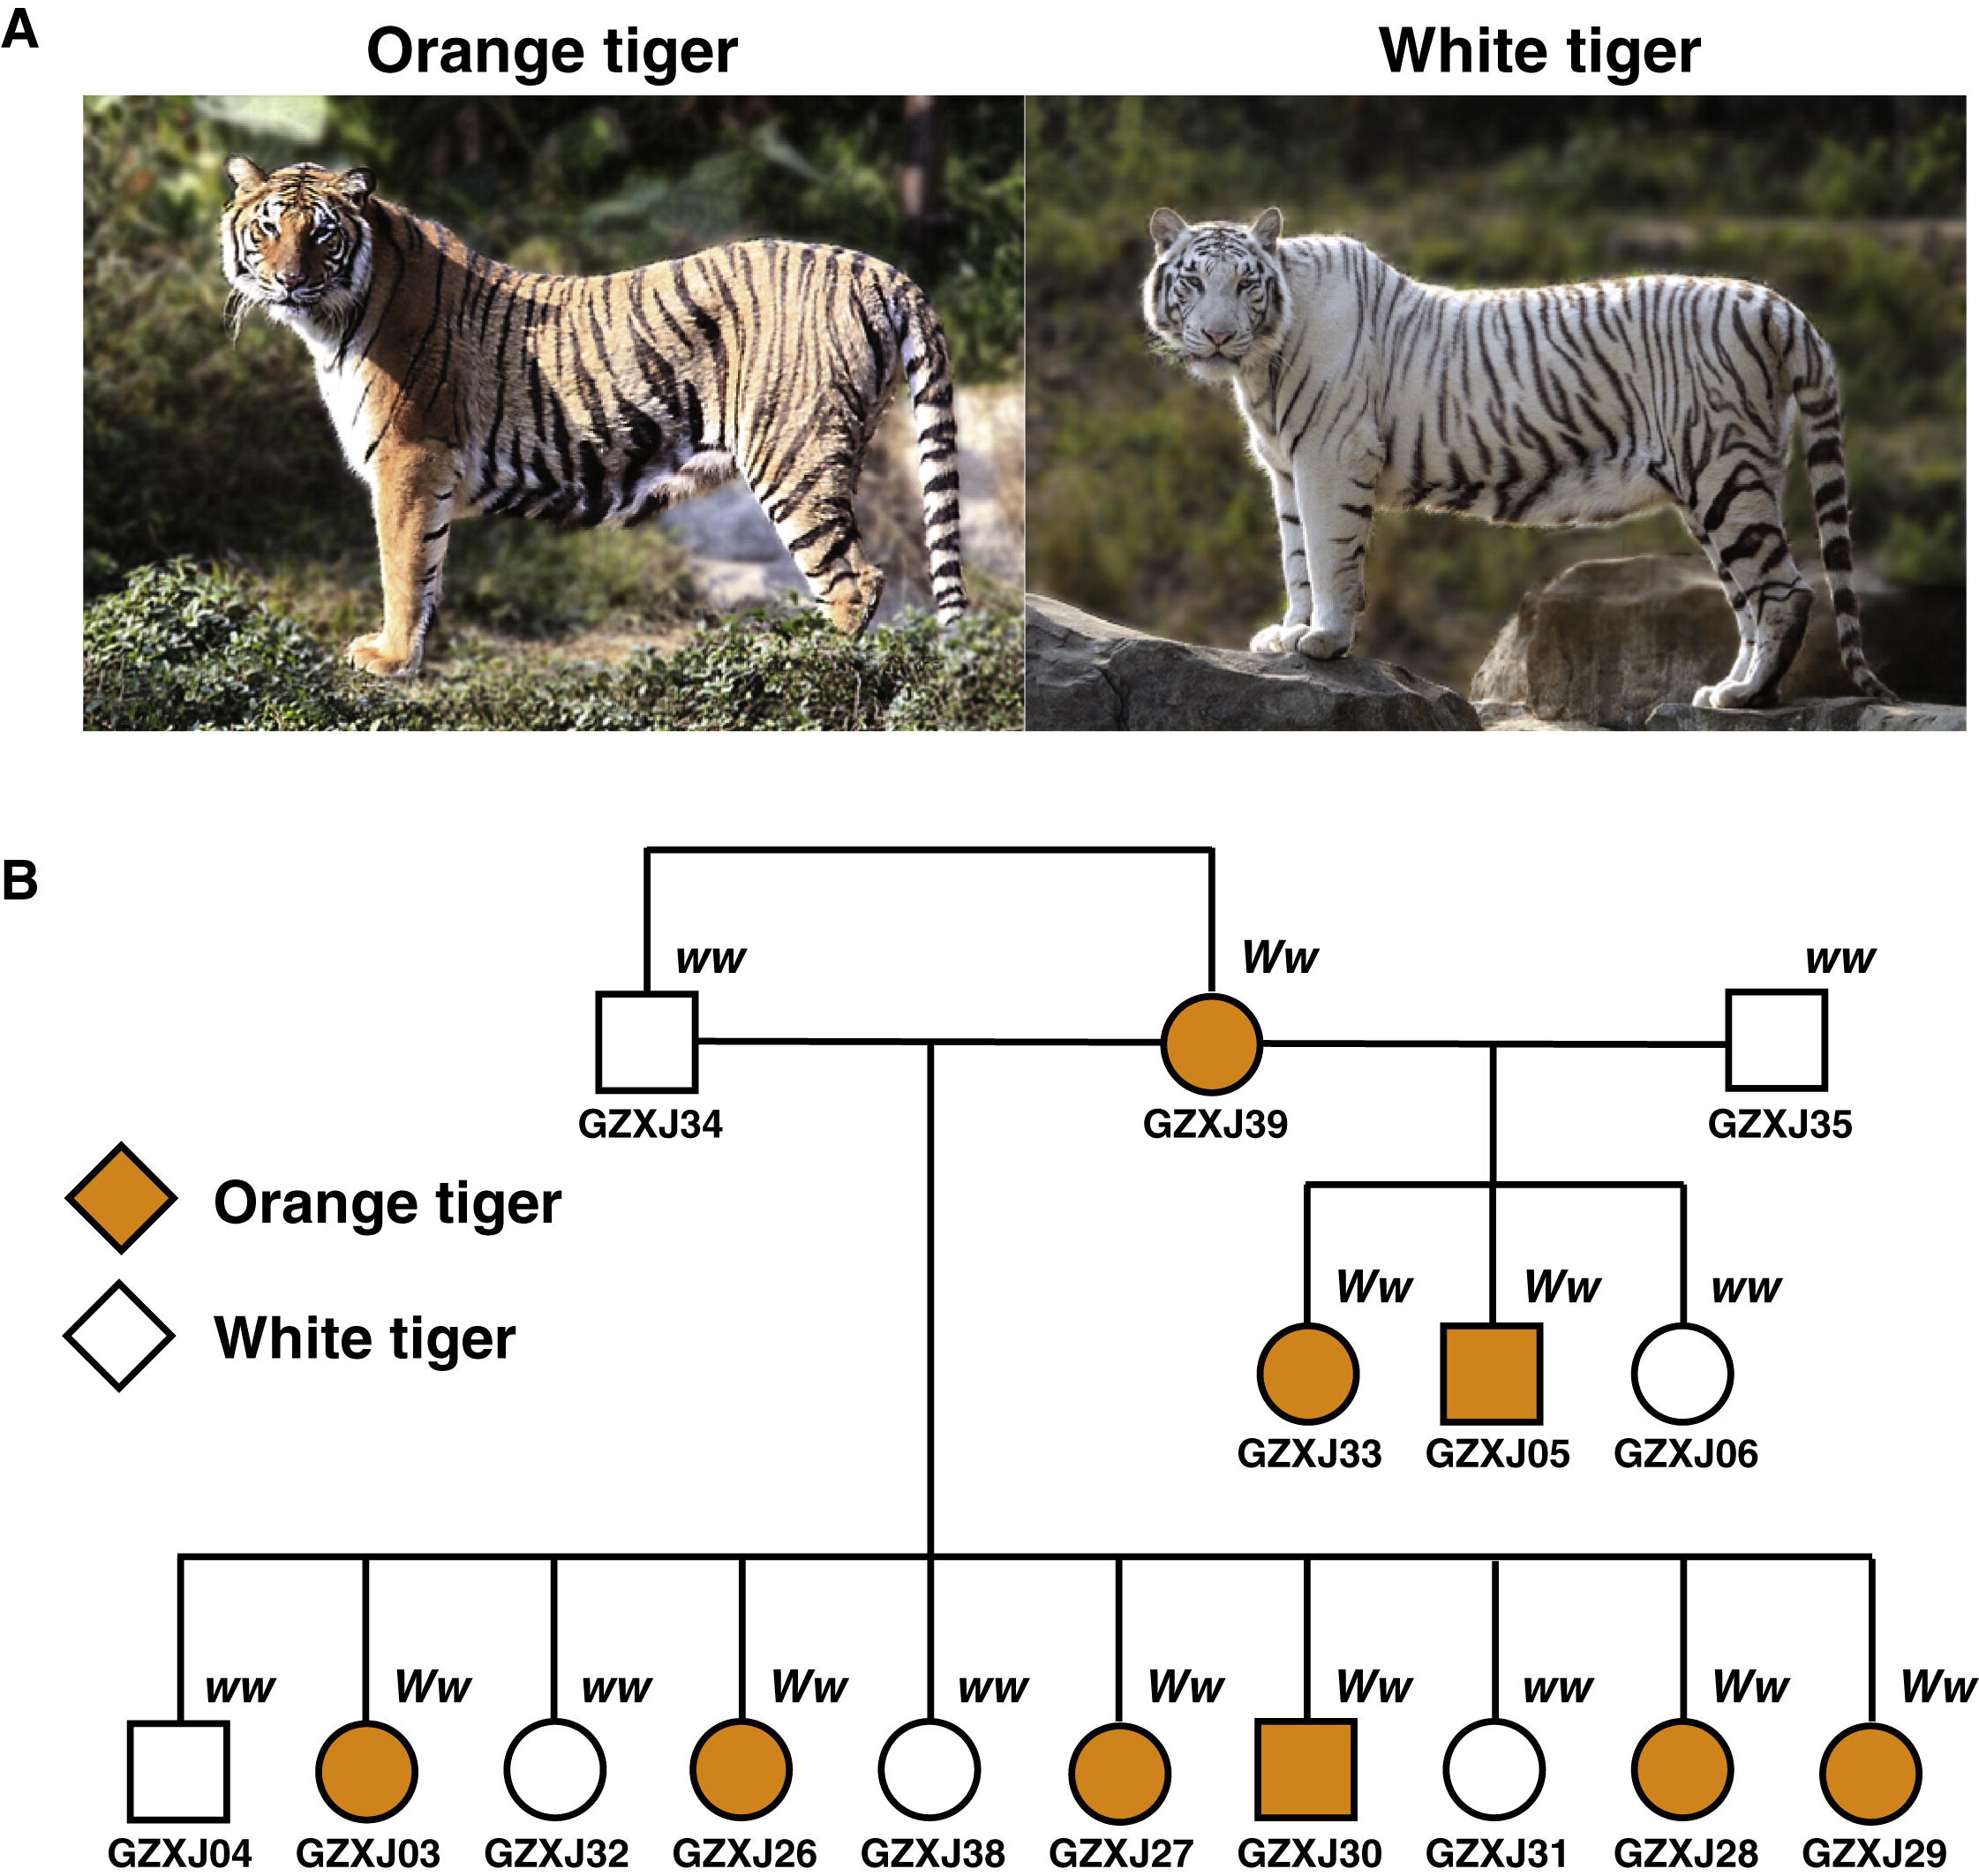 What is the domain system for Siberian tigers?